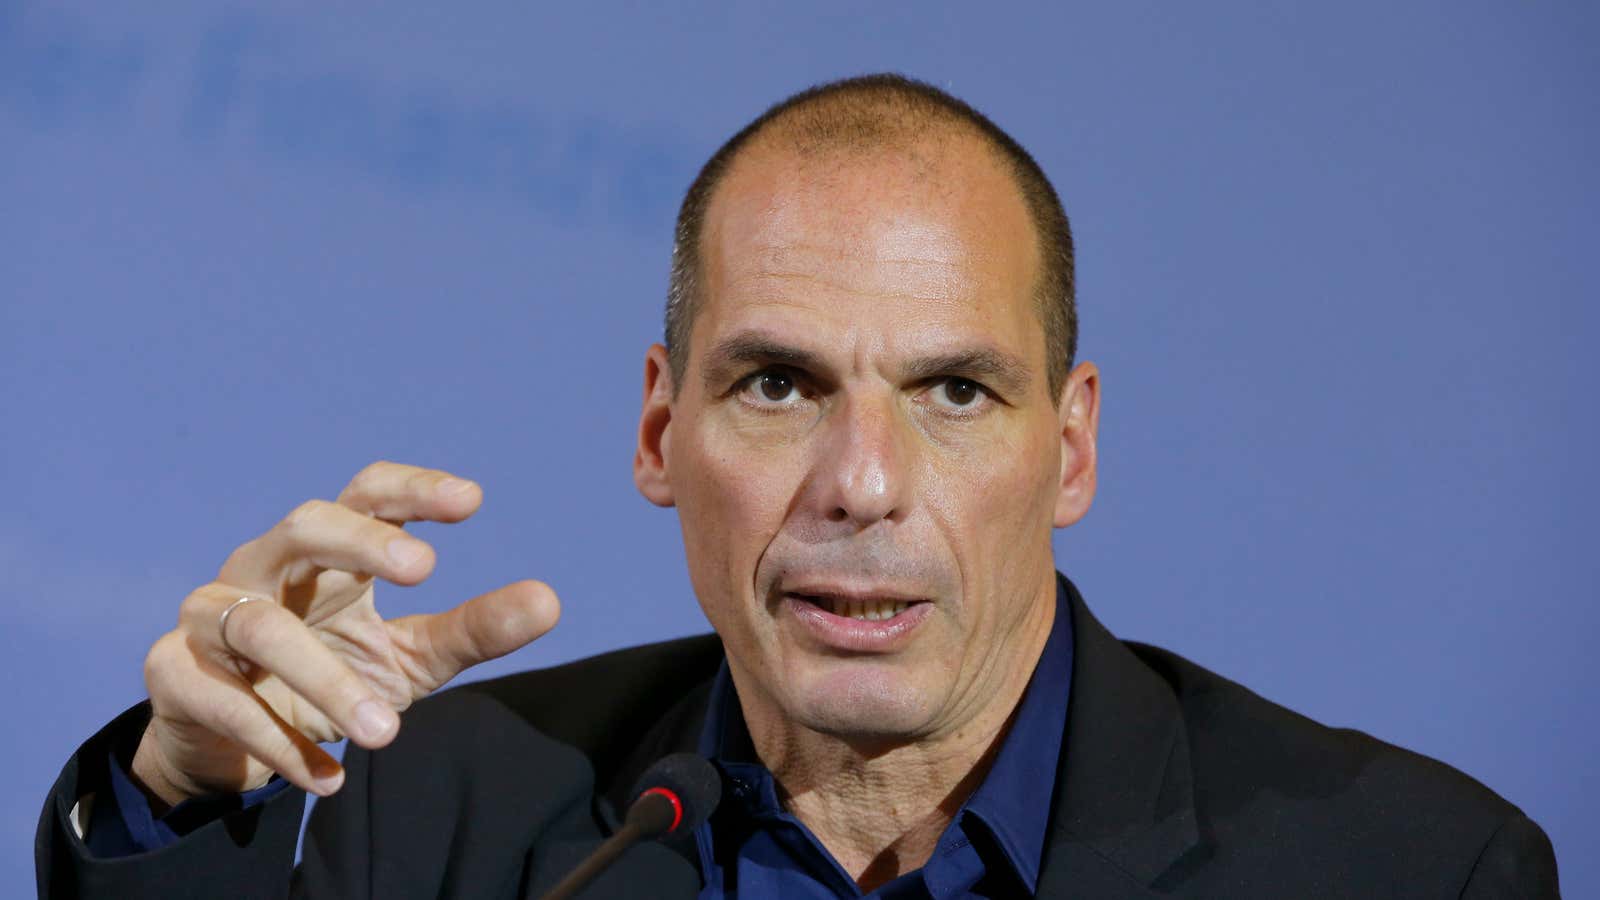 Time is running out to save Greece, and the markets are spooked